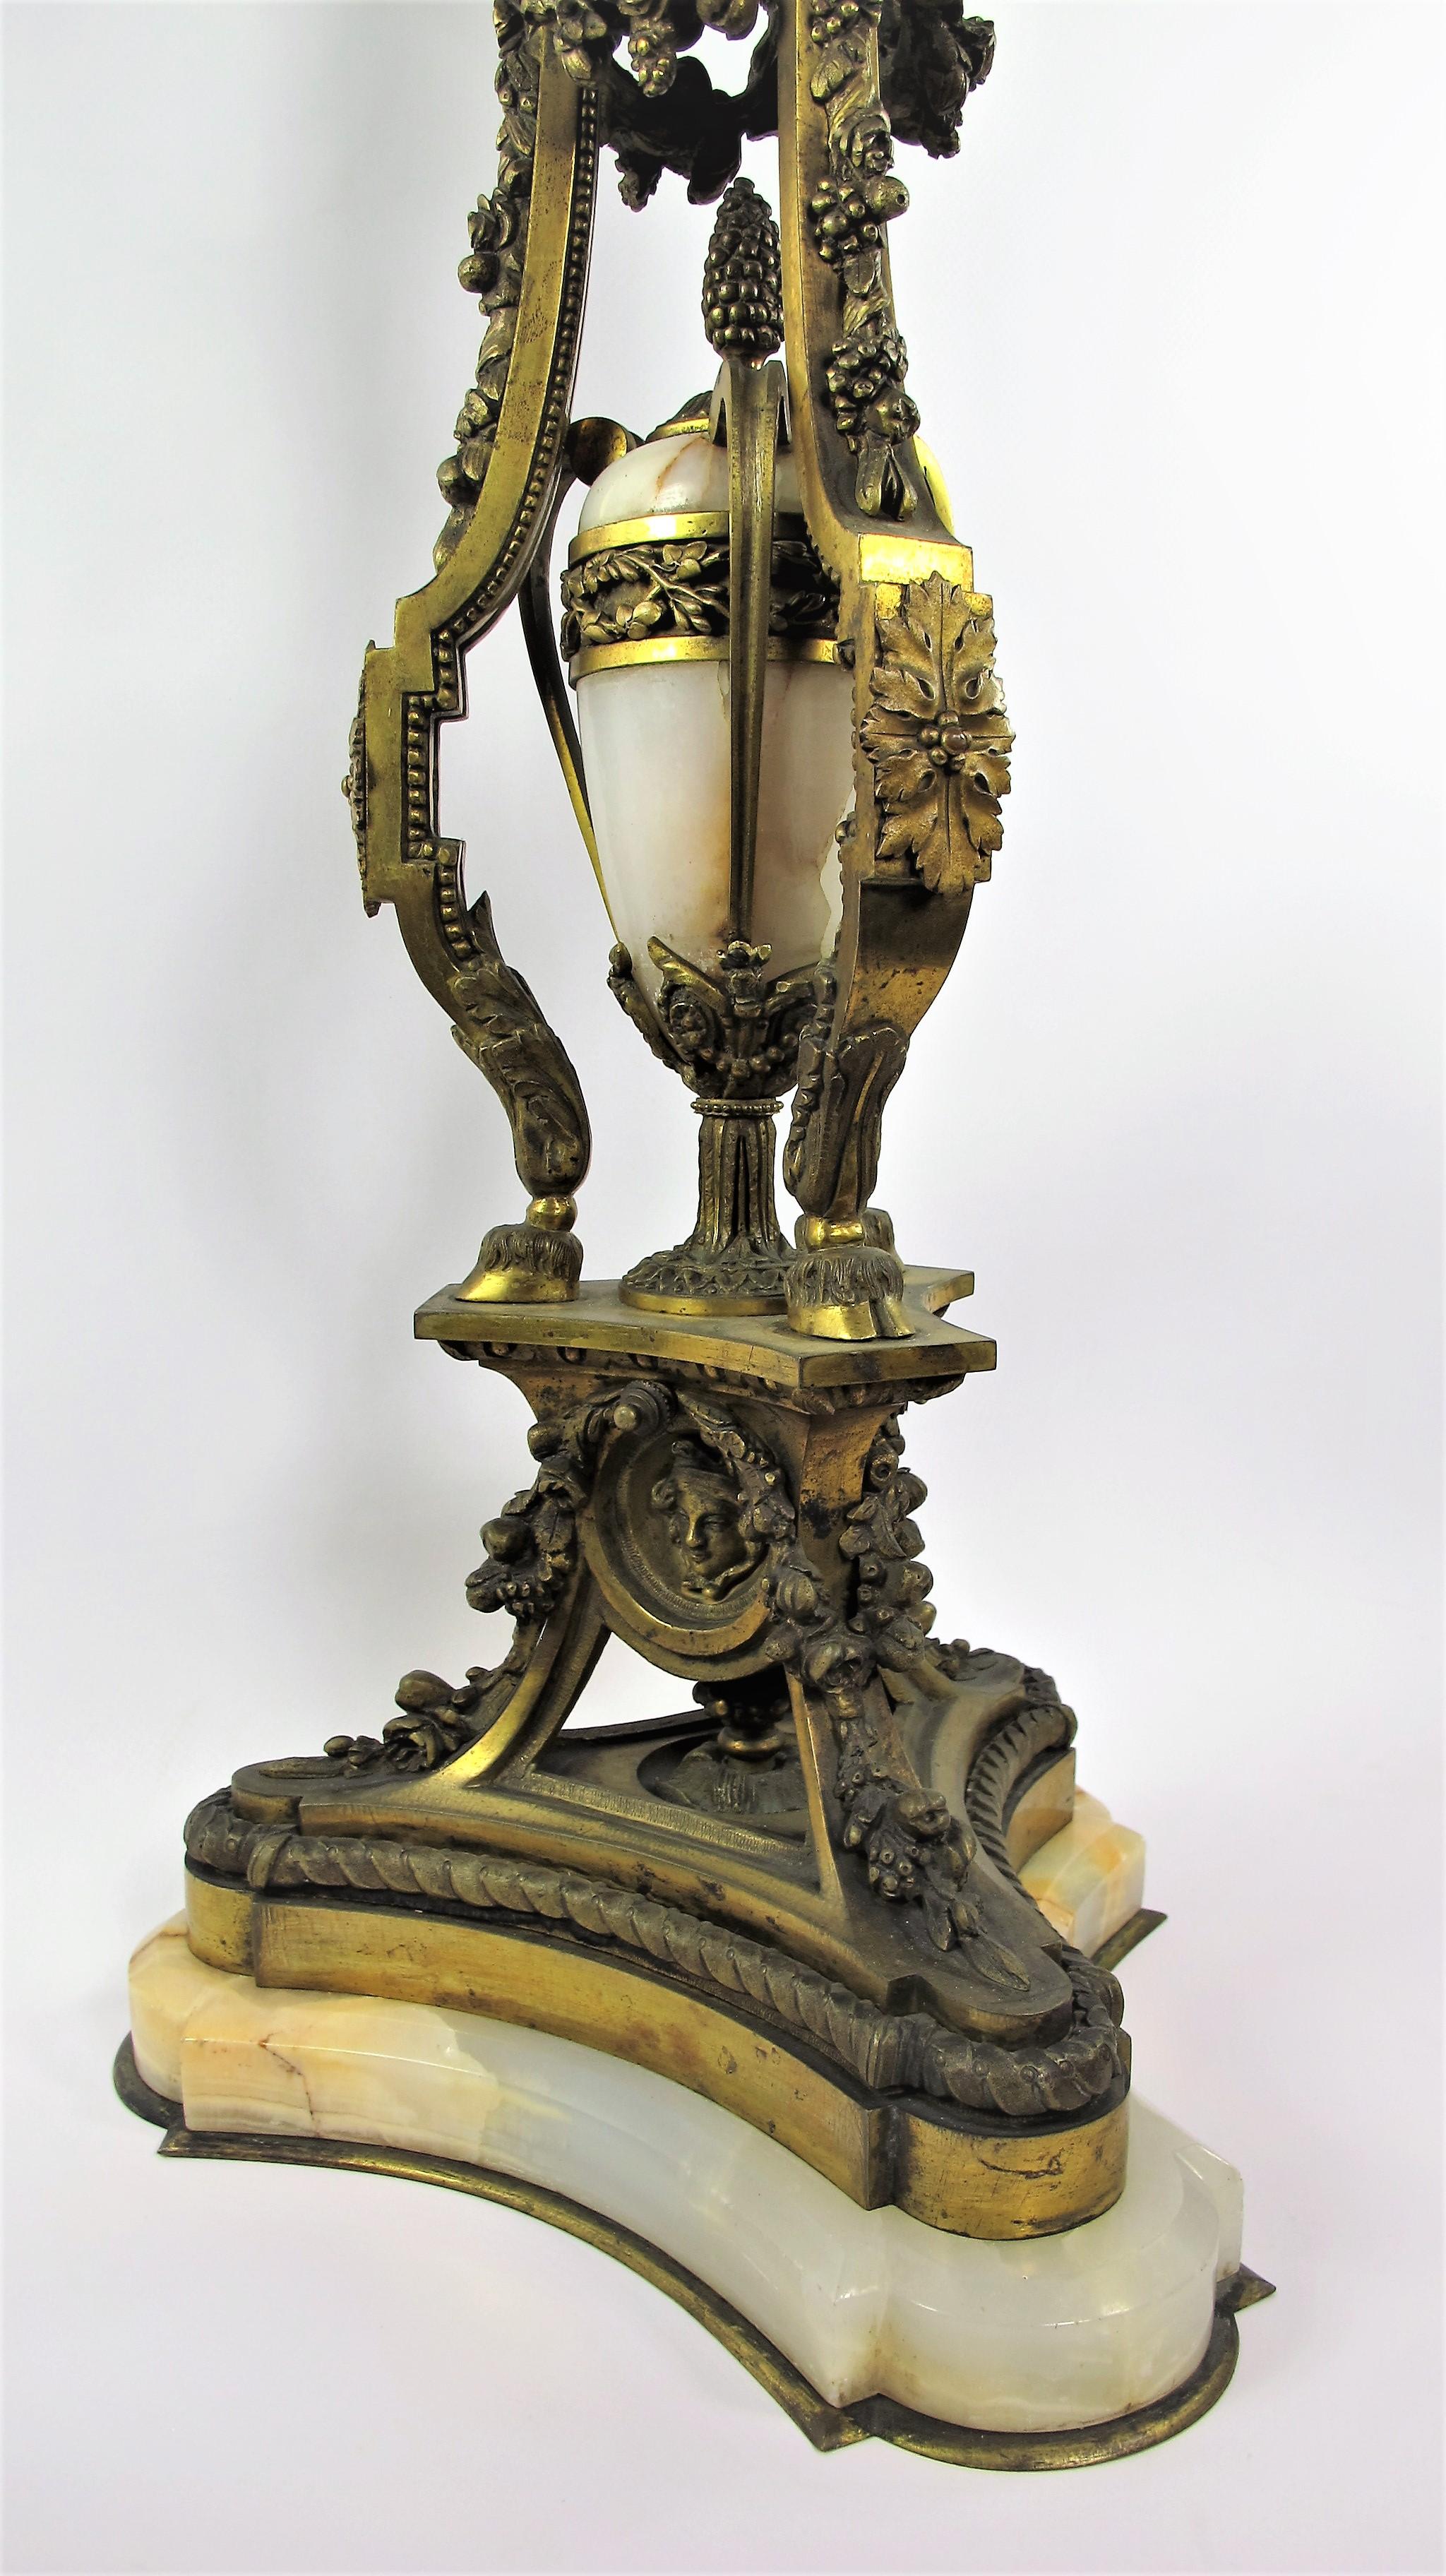 Important living room lamp in chiseled and gilded bronze and onyx marble from Algeria in Louis XVI style. Rich decoration of garlands of flowers, fruits and draperies, missing the shade. The base is tripod-shaped, the center is decorated with a fire